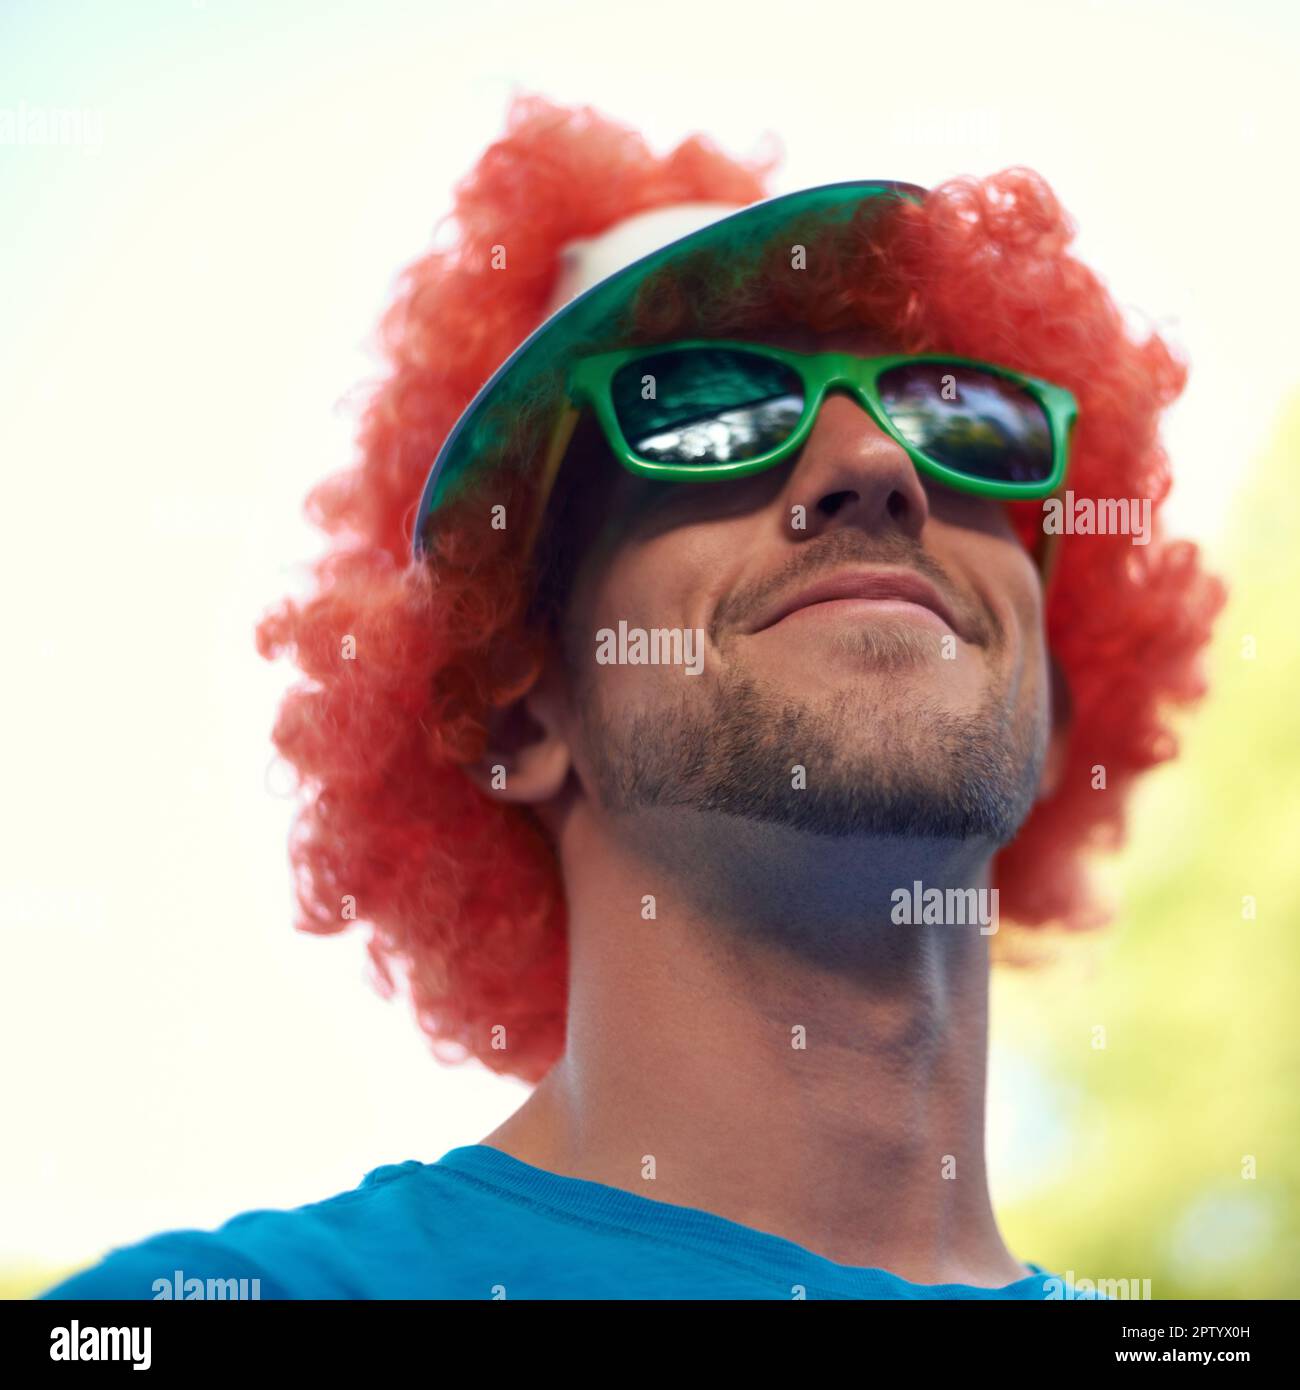 Feeling playful. A young man wearing a playful red wig at an outdoor event Stock Photo